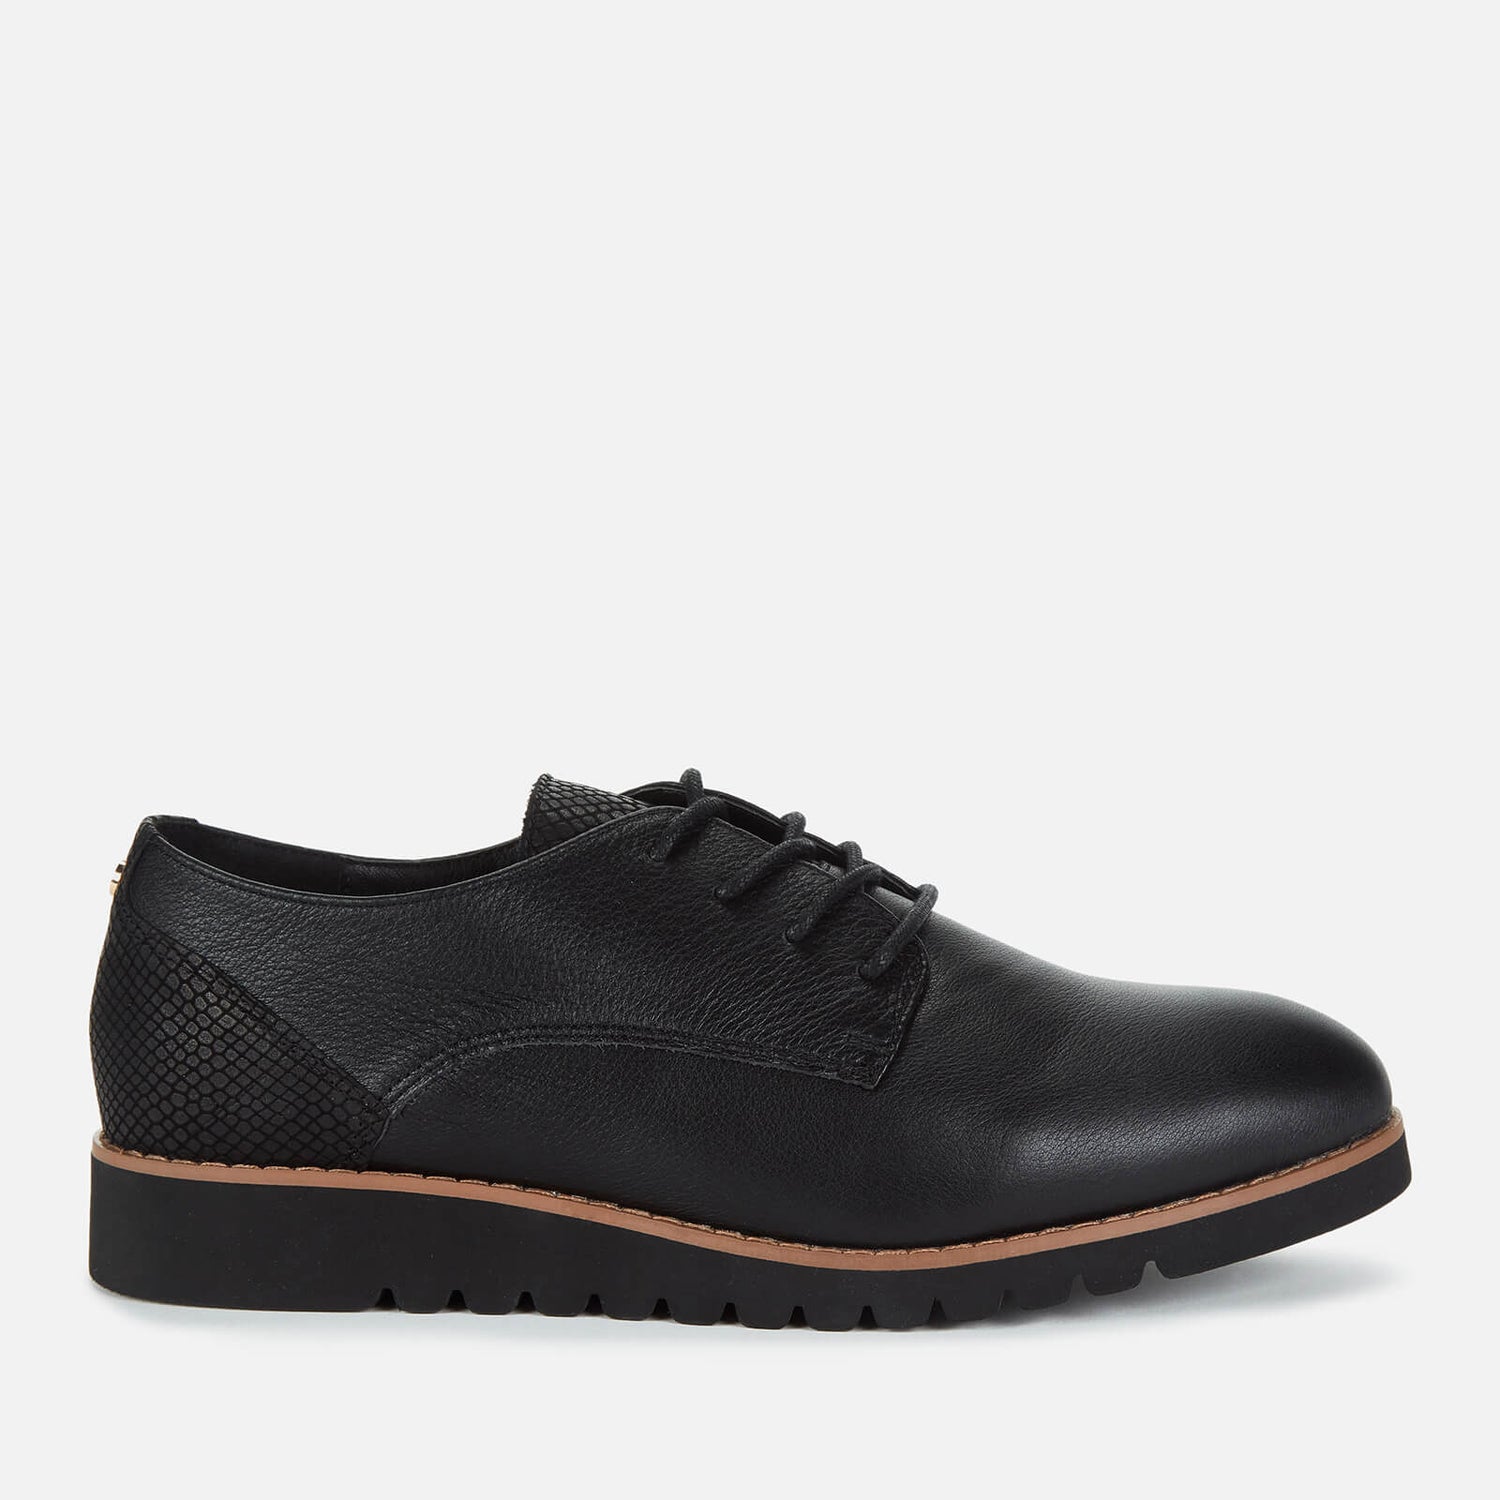 Dune Women's Flinch Leather Derby Shoes - Black | FREE UK Delivery ...